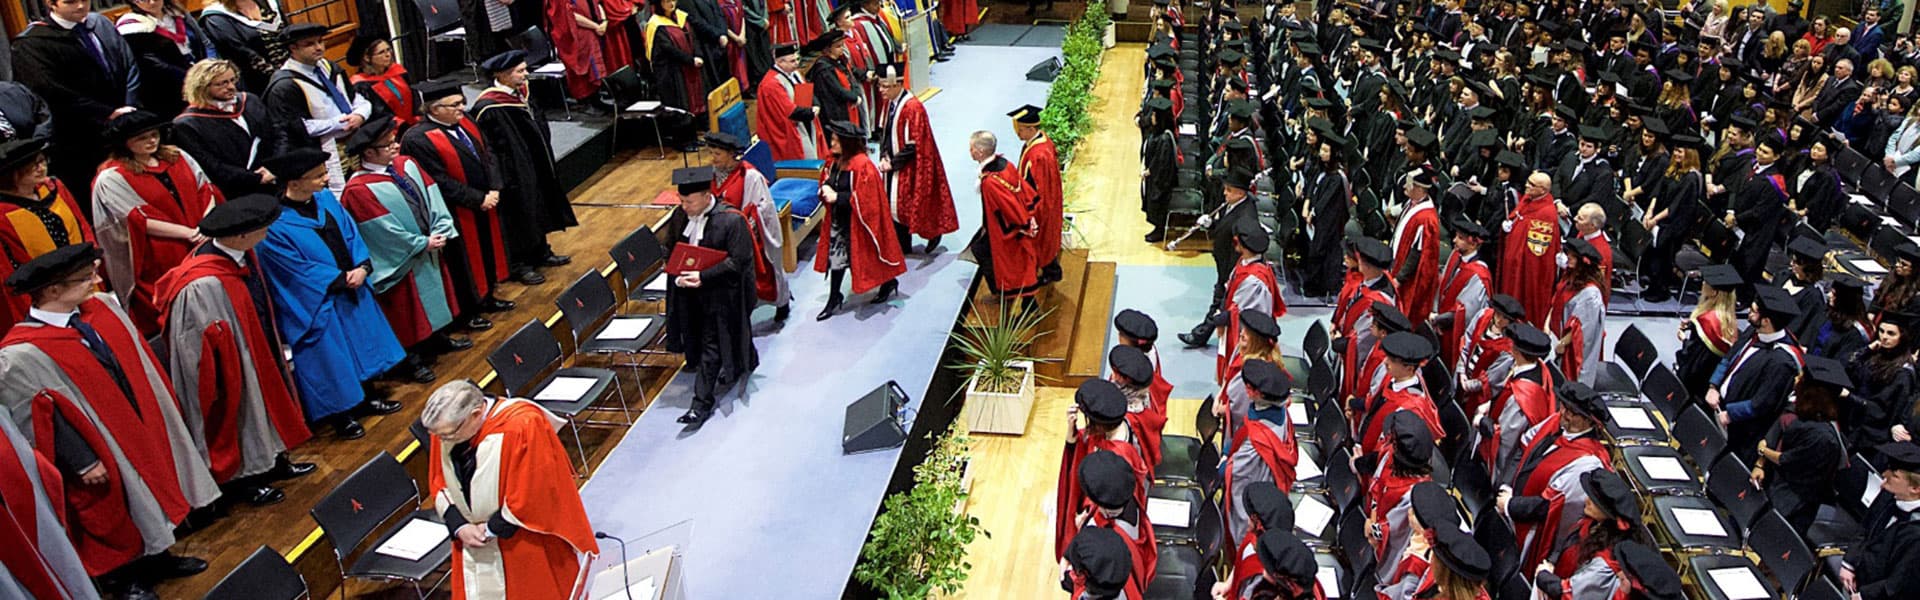 A graduation ceremony seen from overhead, with people in colourful robes and rows of students